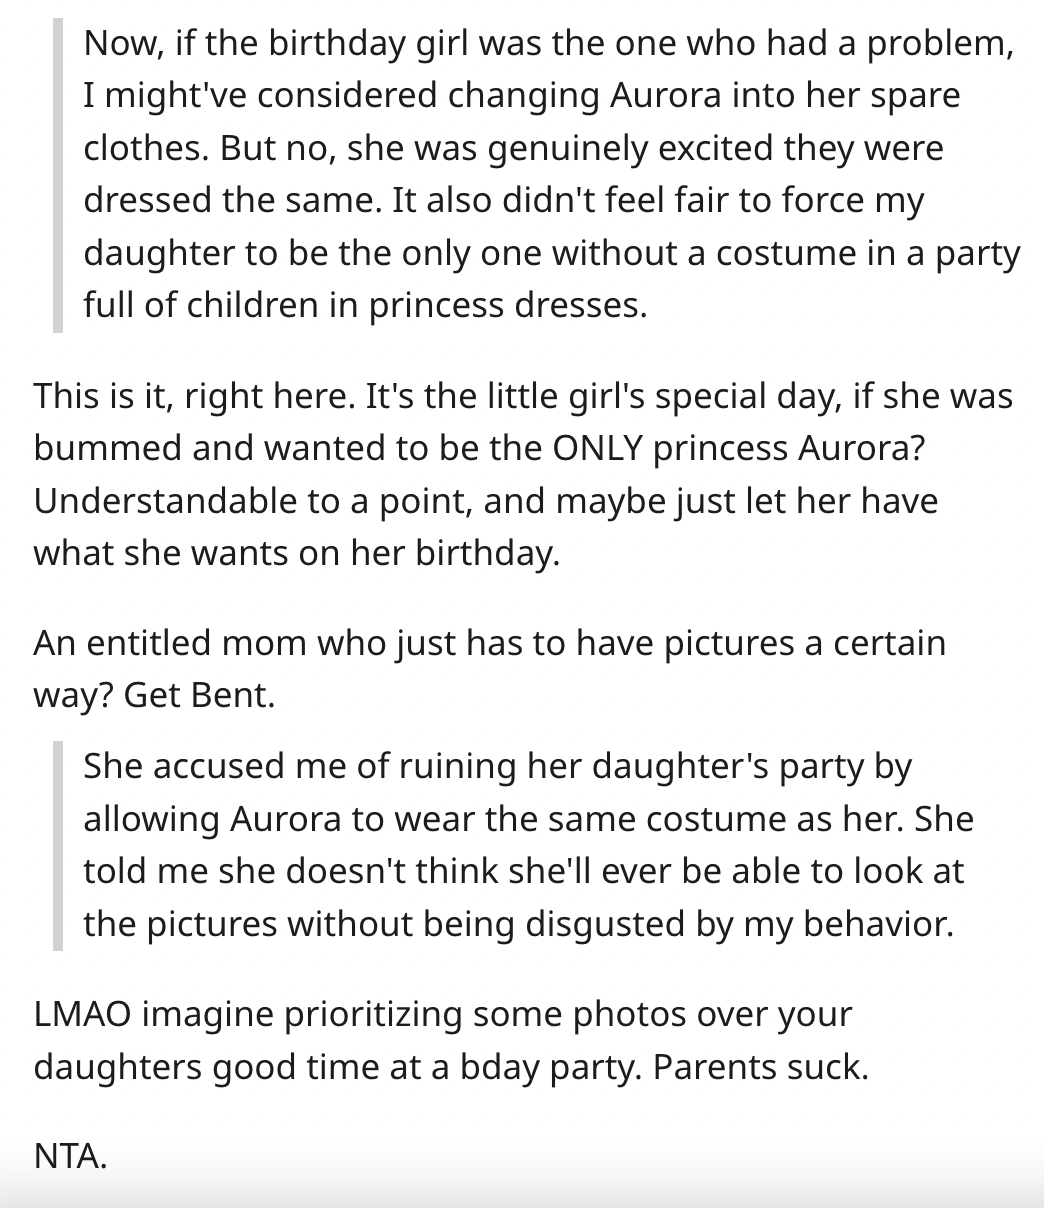 Mom Accused Of Ruining Her Daughter's Childhood By Dressing Her In